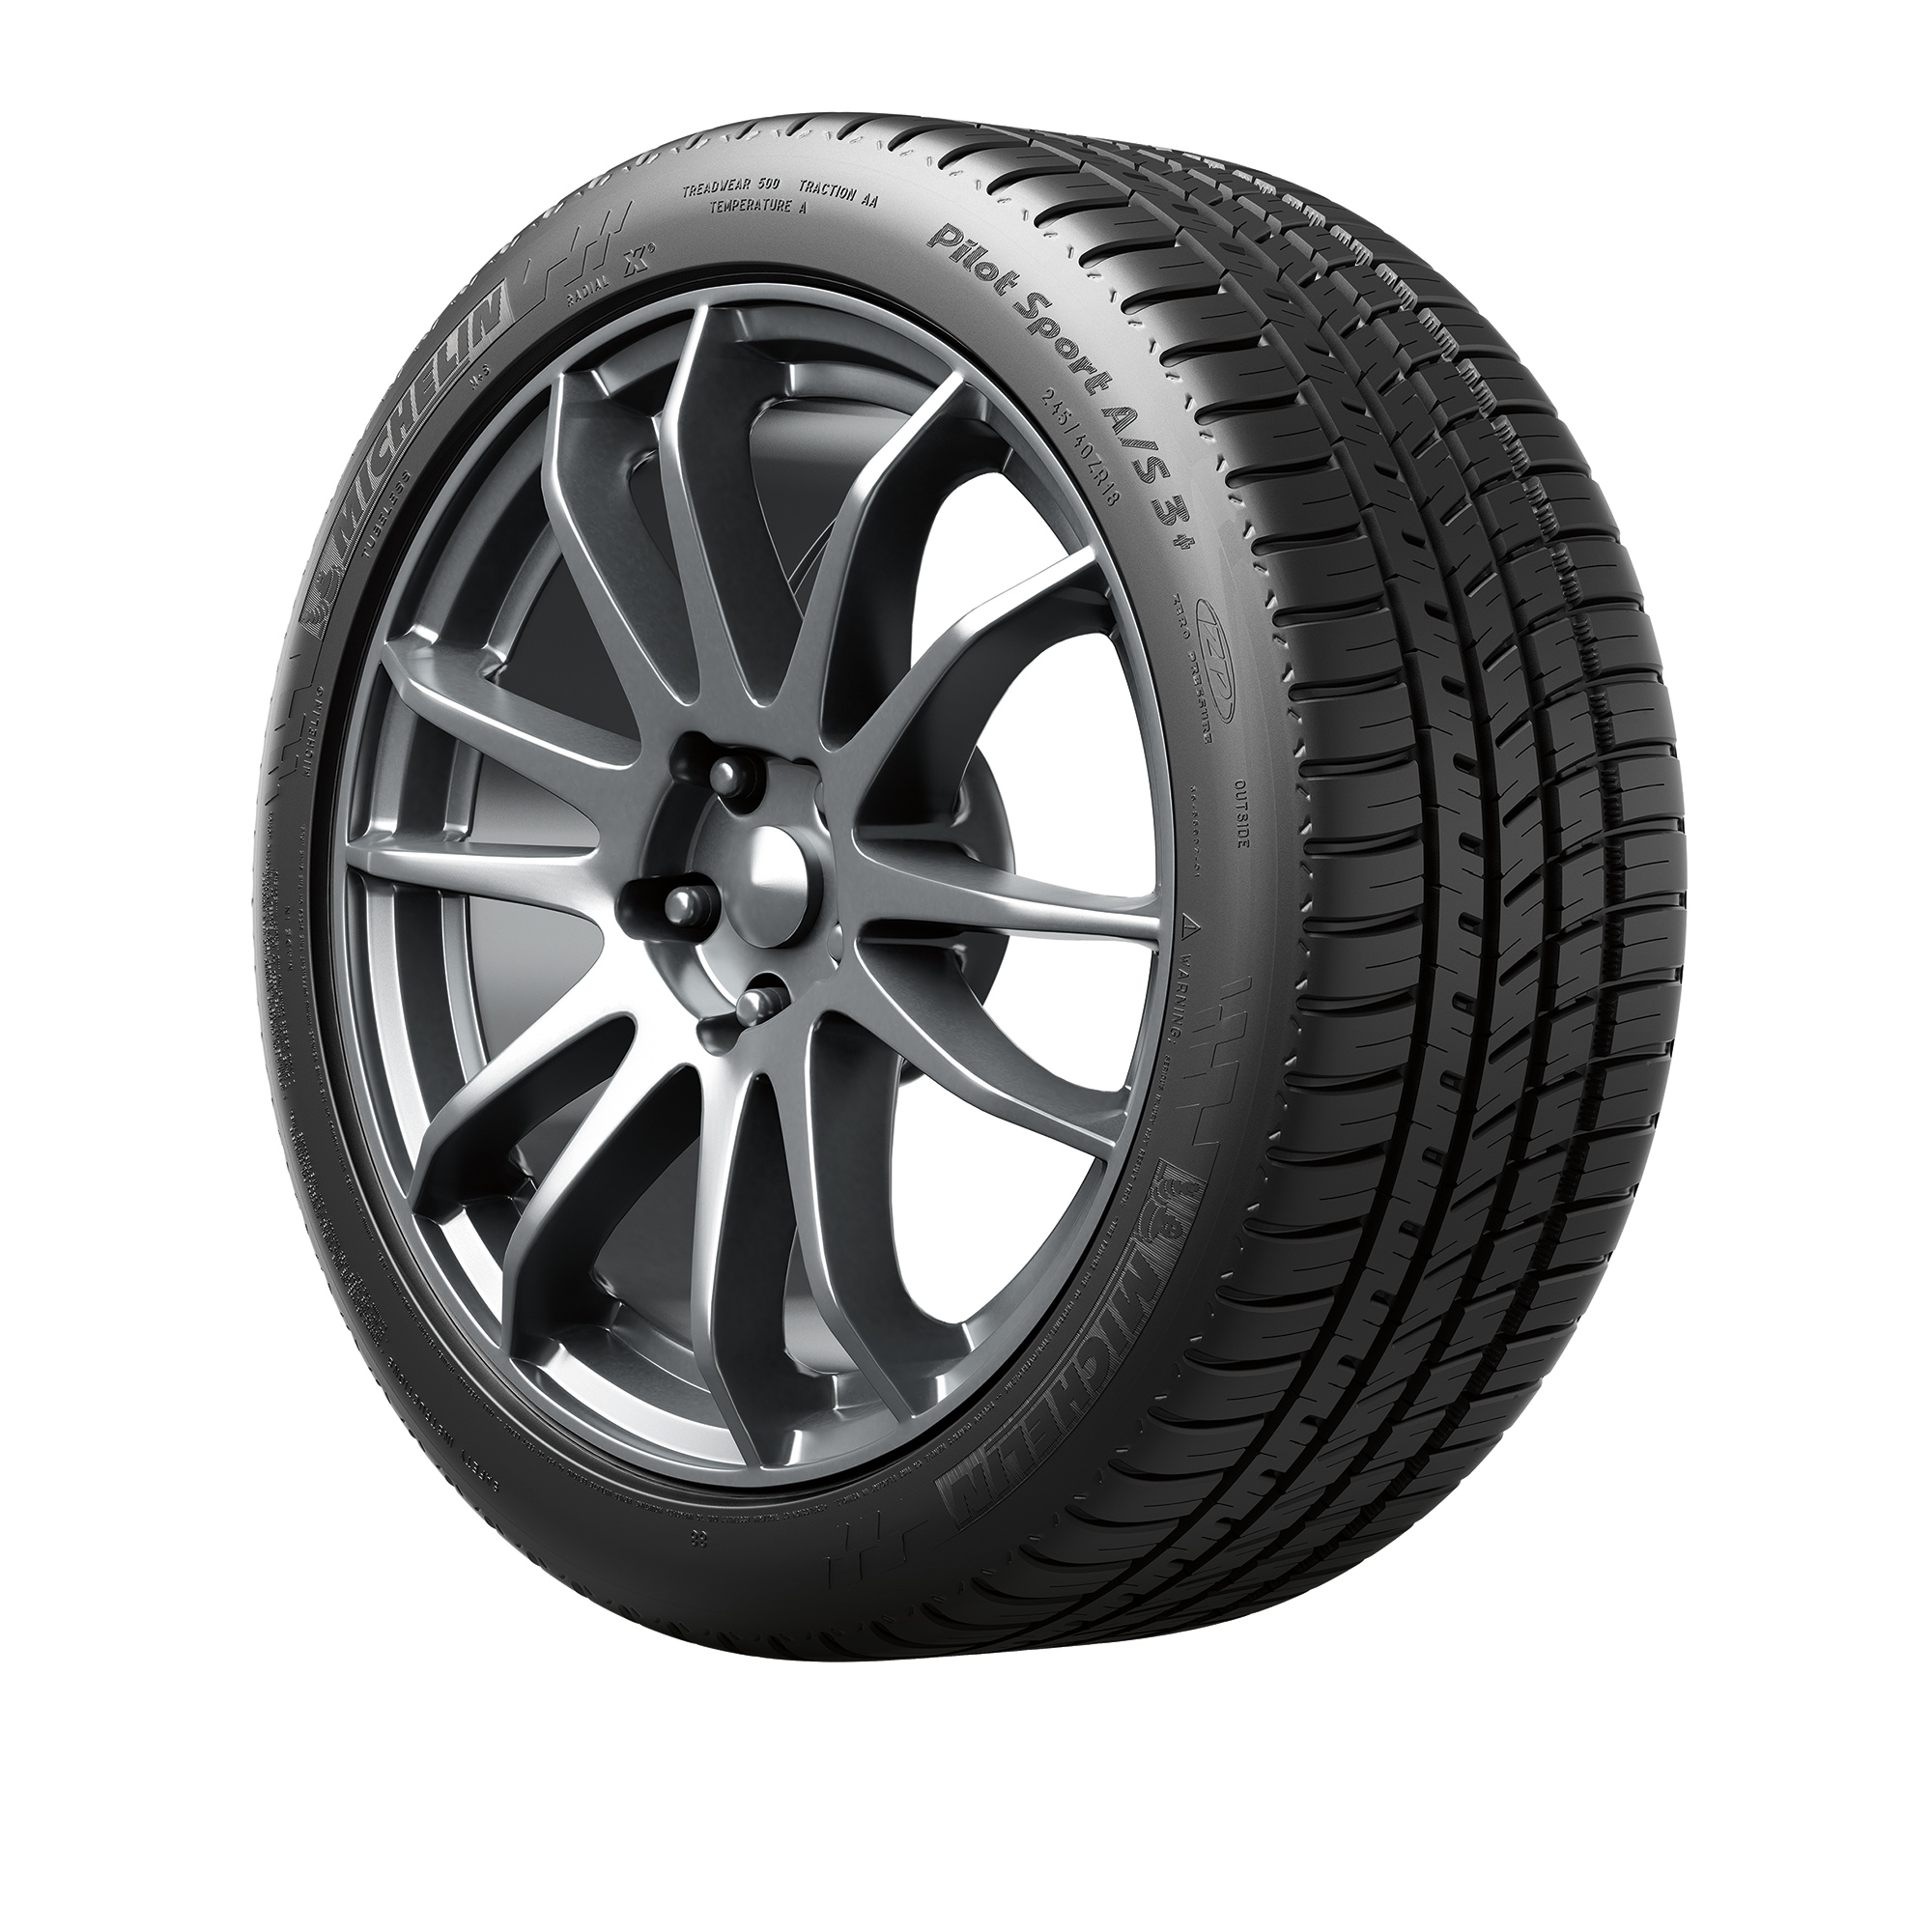 Michelin Pilot Sport A/S 3+ 205/55R16 91V BSW High Performance tire - image 2 of 6